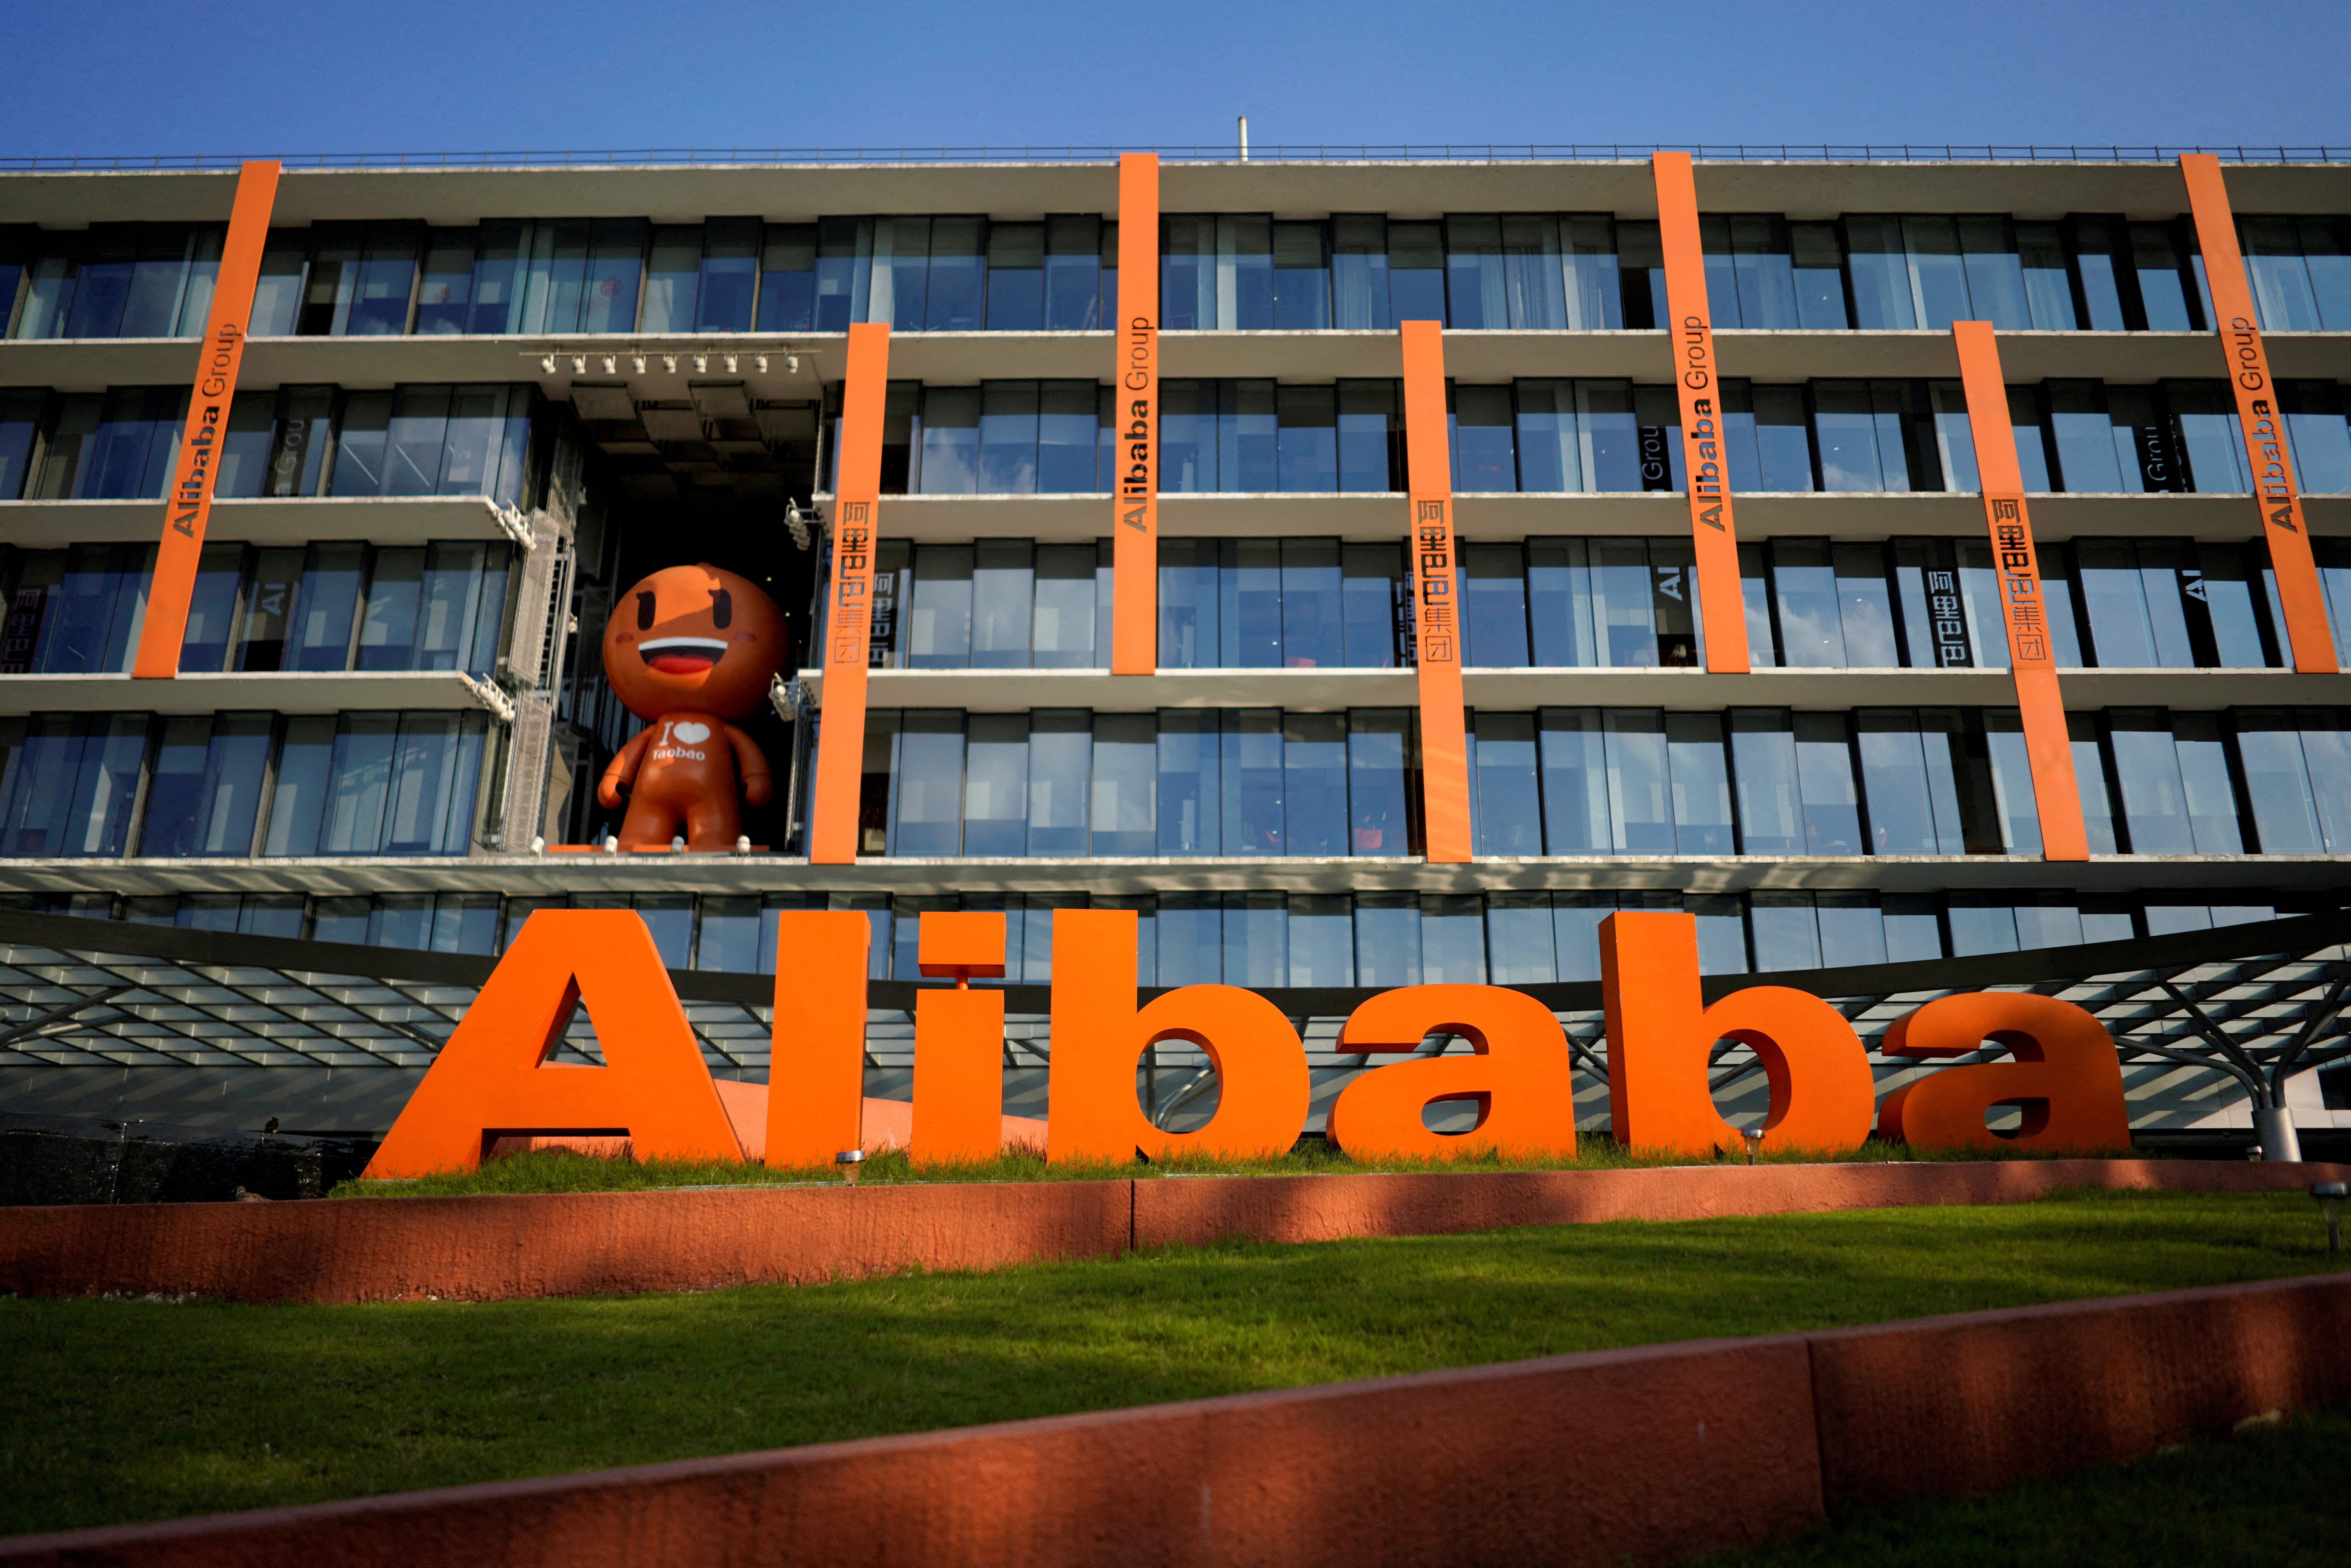 Alibaba, Tencent shares rise as investors bet China's tech crackdown is over